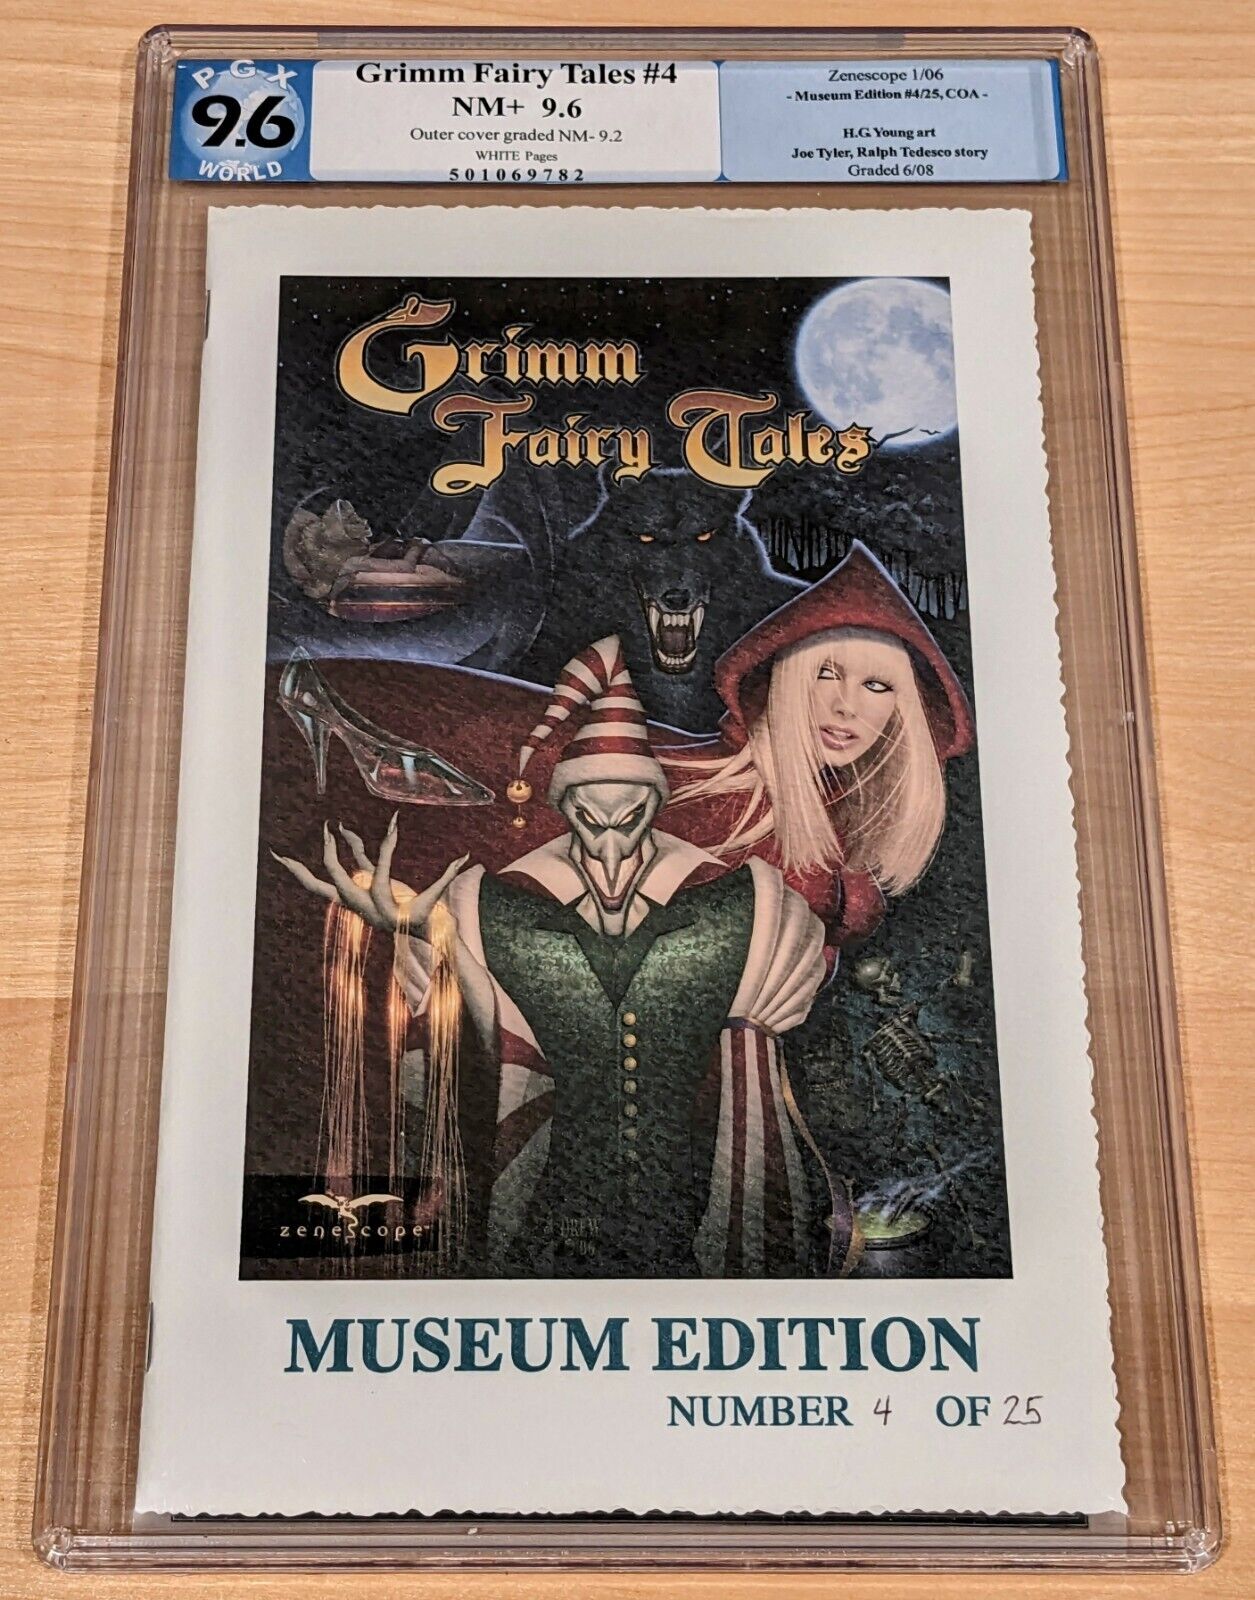 GRIMM FAIRY TALES #4 MUSEUM EDITION VARIANT PGX 9.6 JAYCO EXCLUSIVE LTD. #04/25